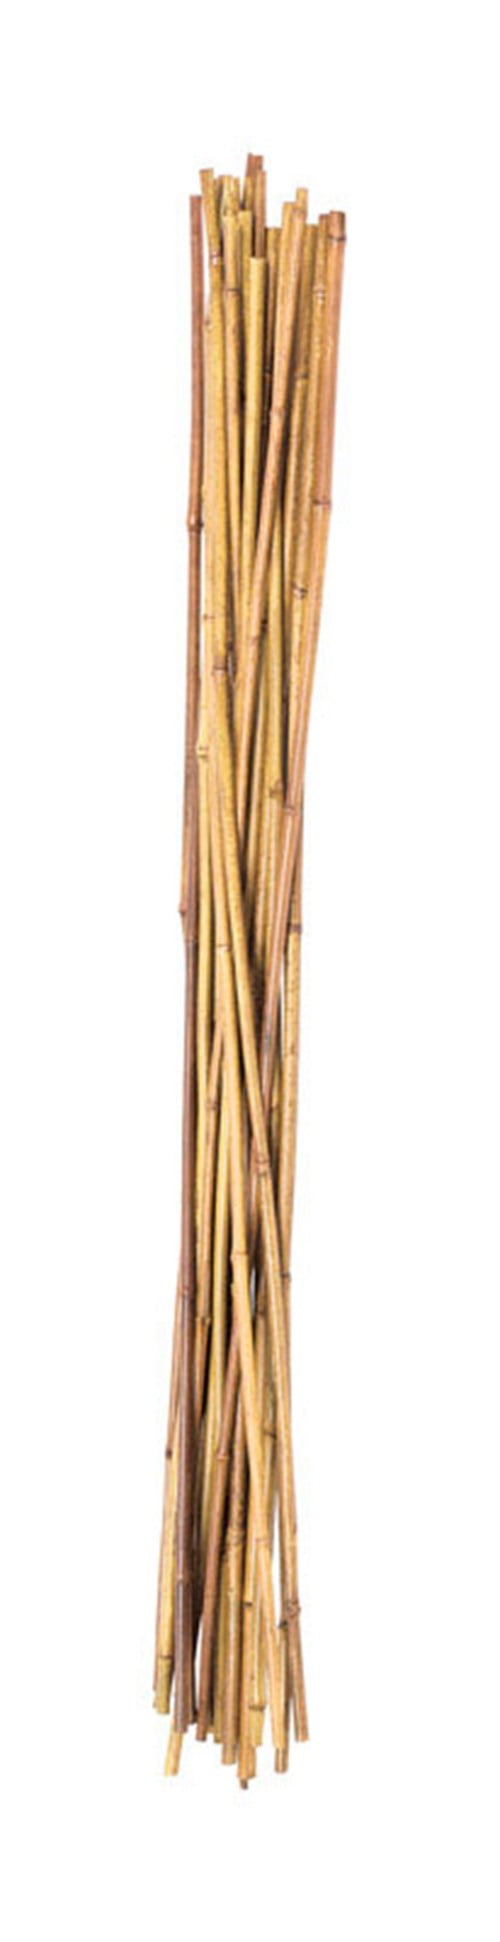 Bond Manufacturing SMG12034 6 ft Heavy Duty Bamboo Stakes 6 Pack 